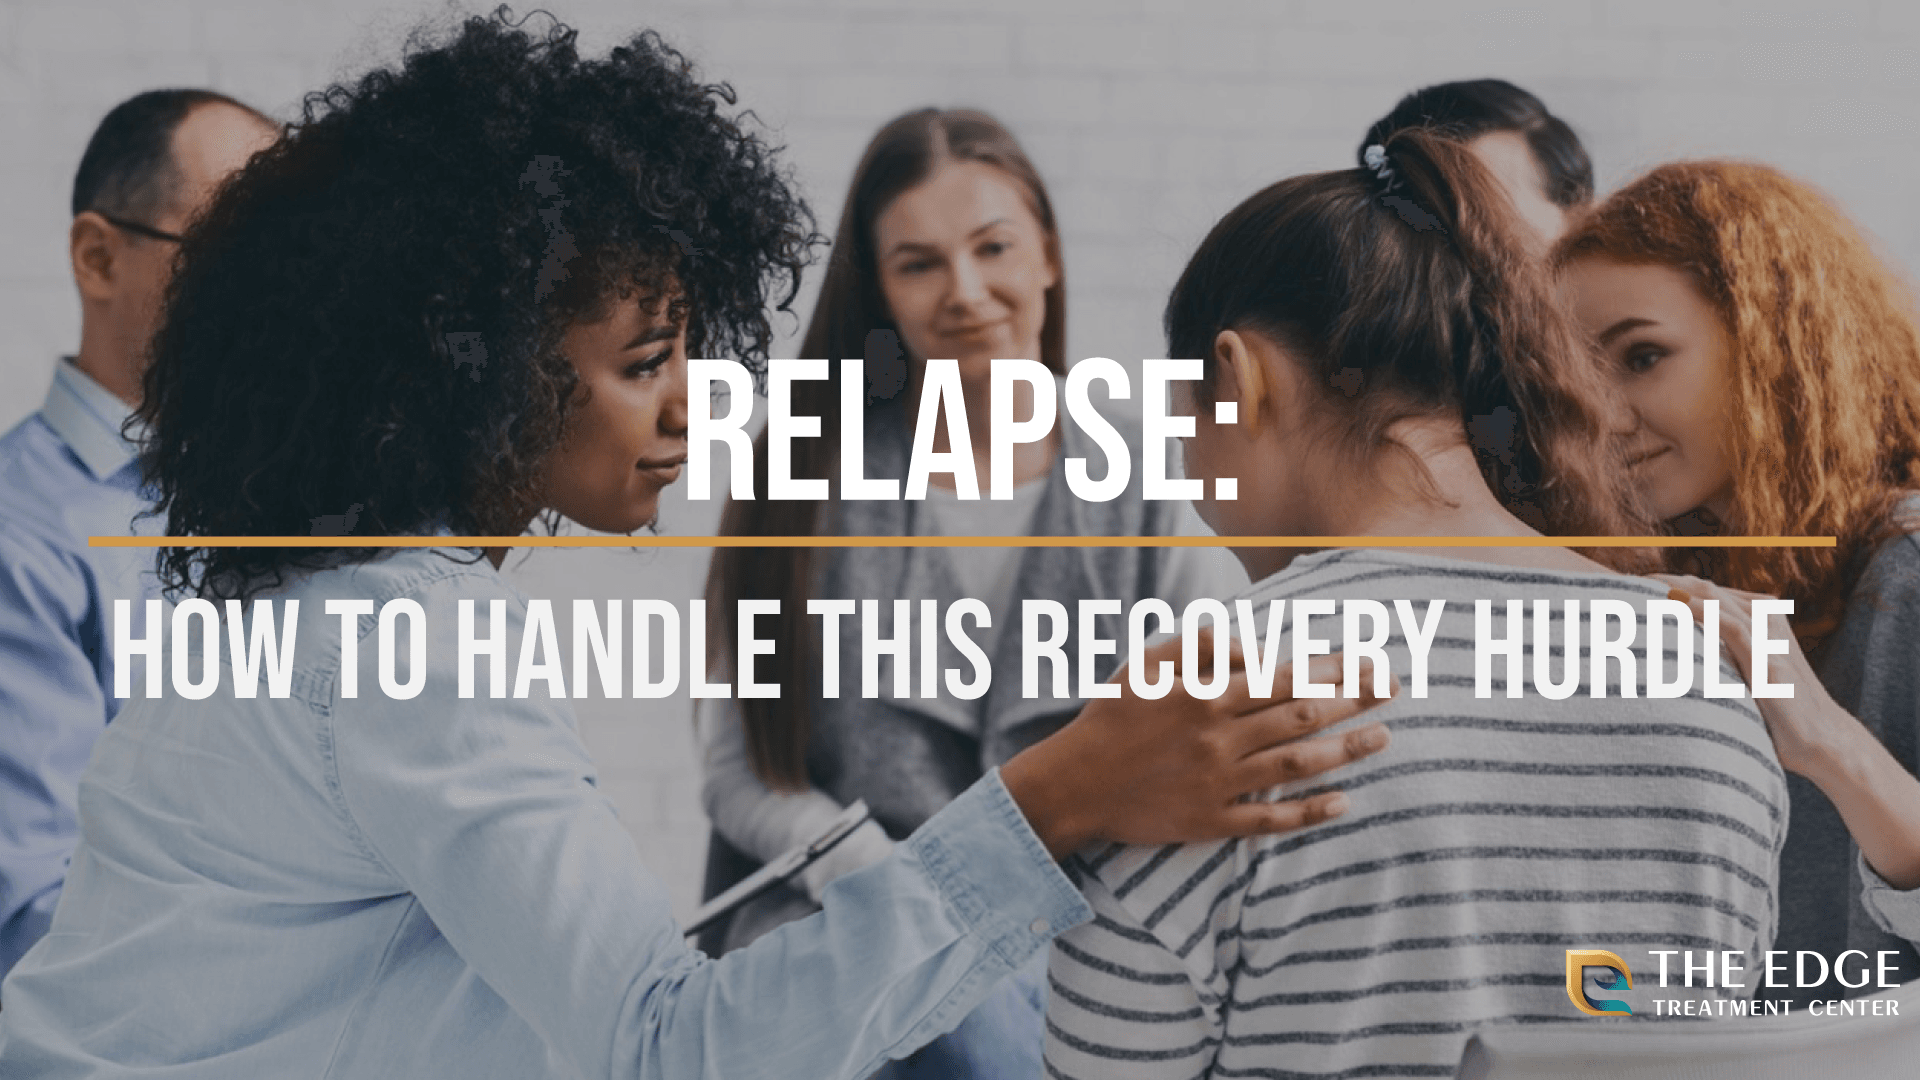 How to Avoid Relapse...and Get Back On Track After a Relapse